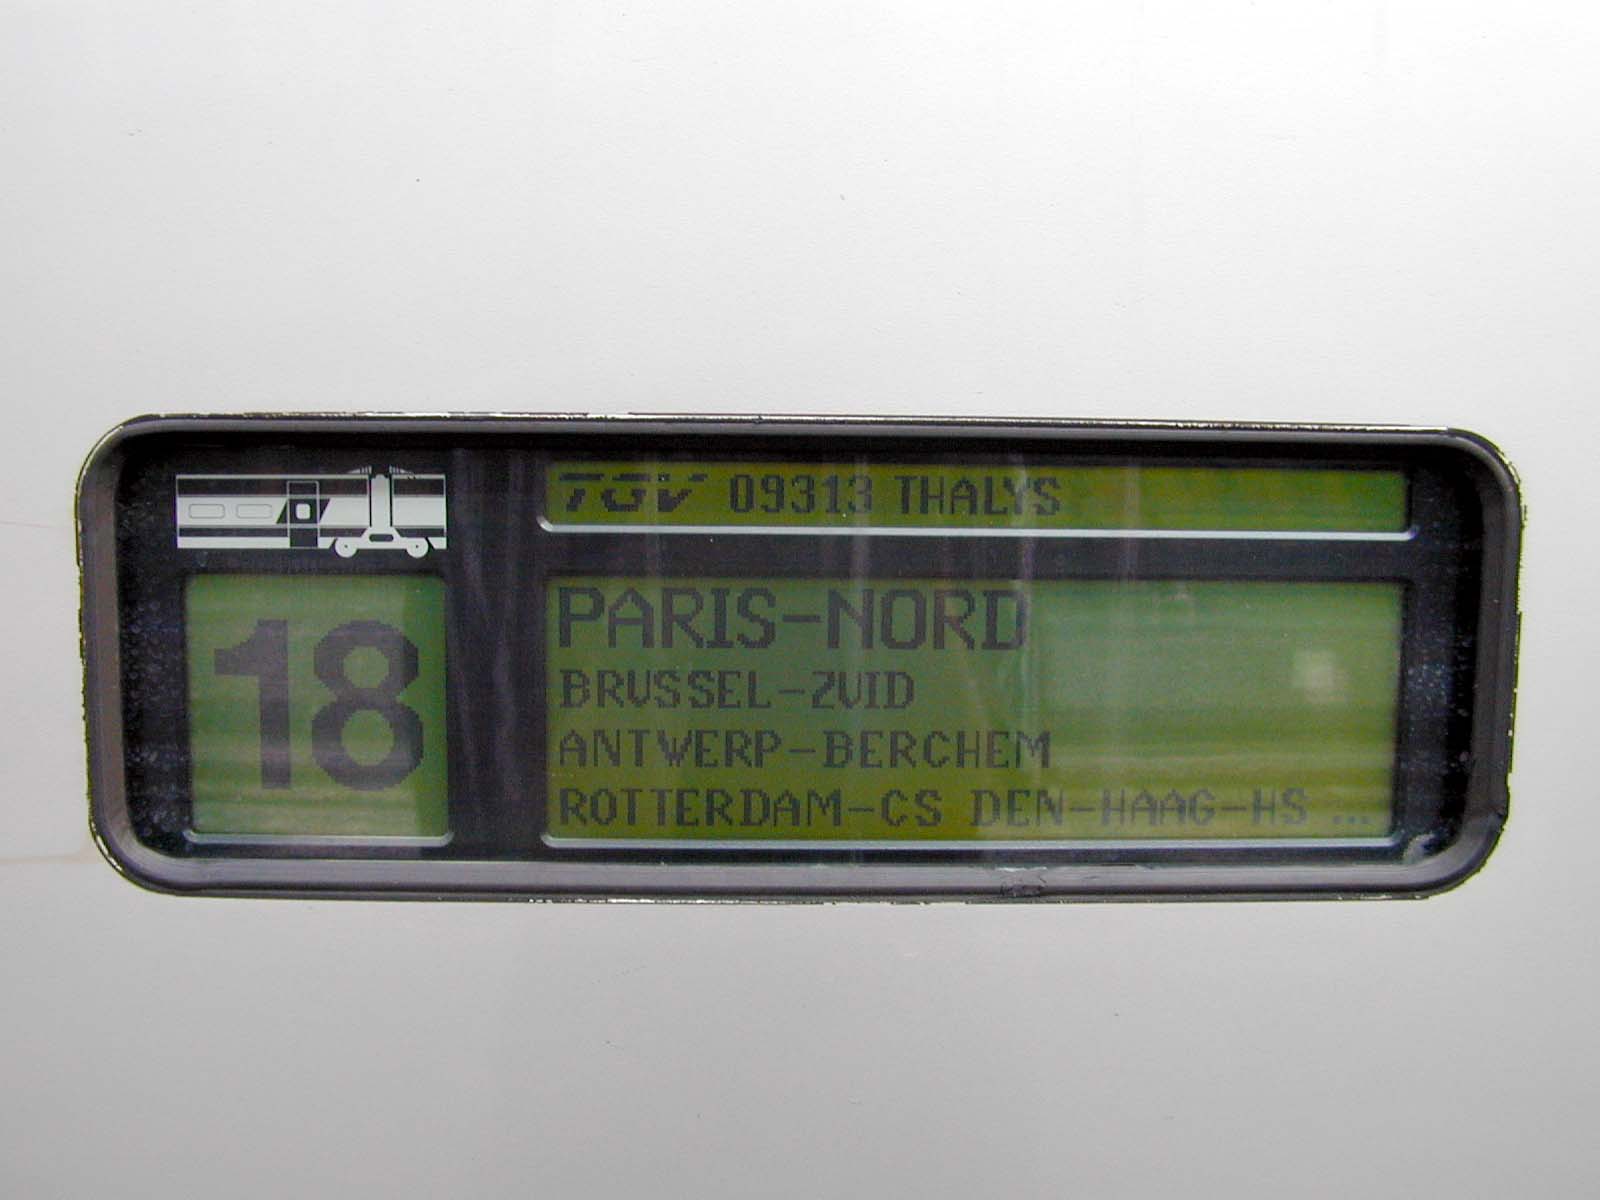 objects circuits numbers typo typography tgv thalys glass timetable 18 modern digital